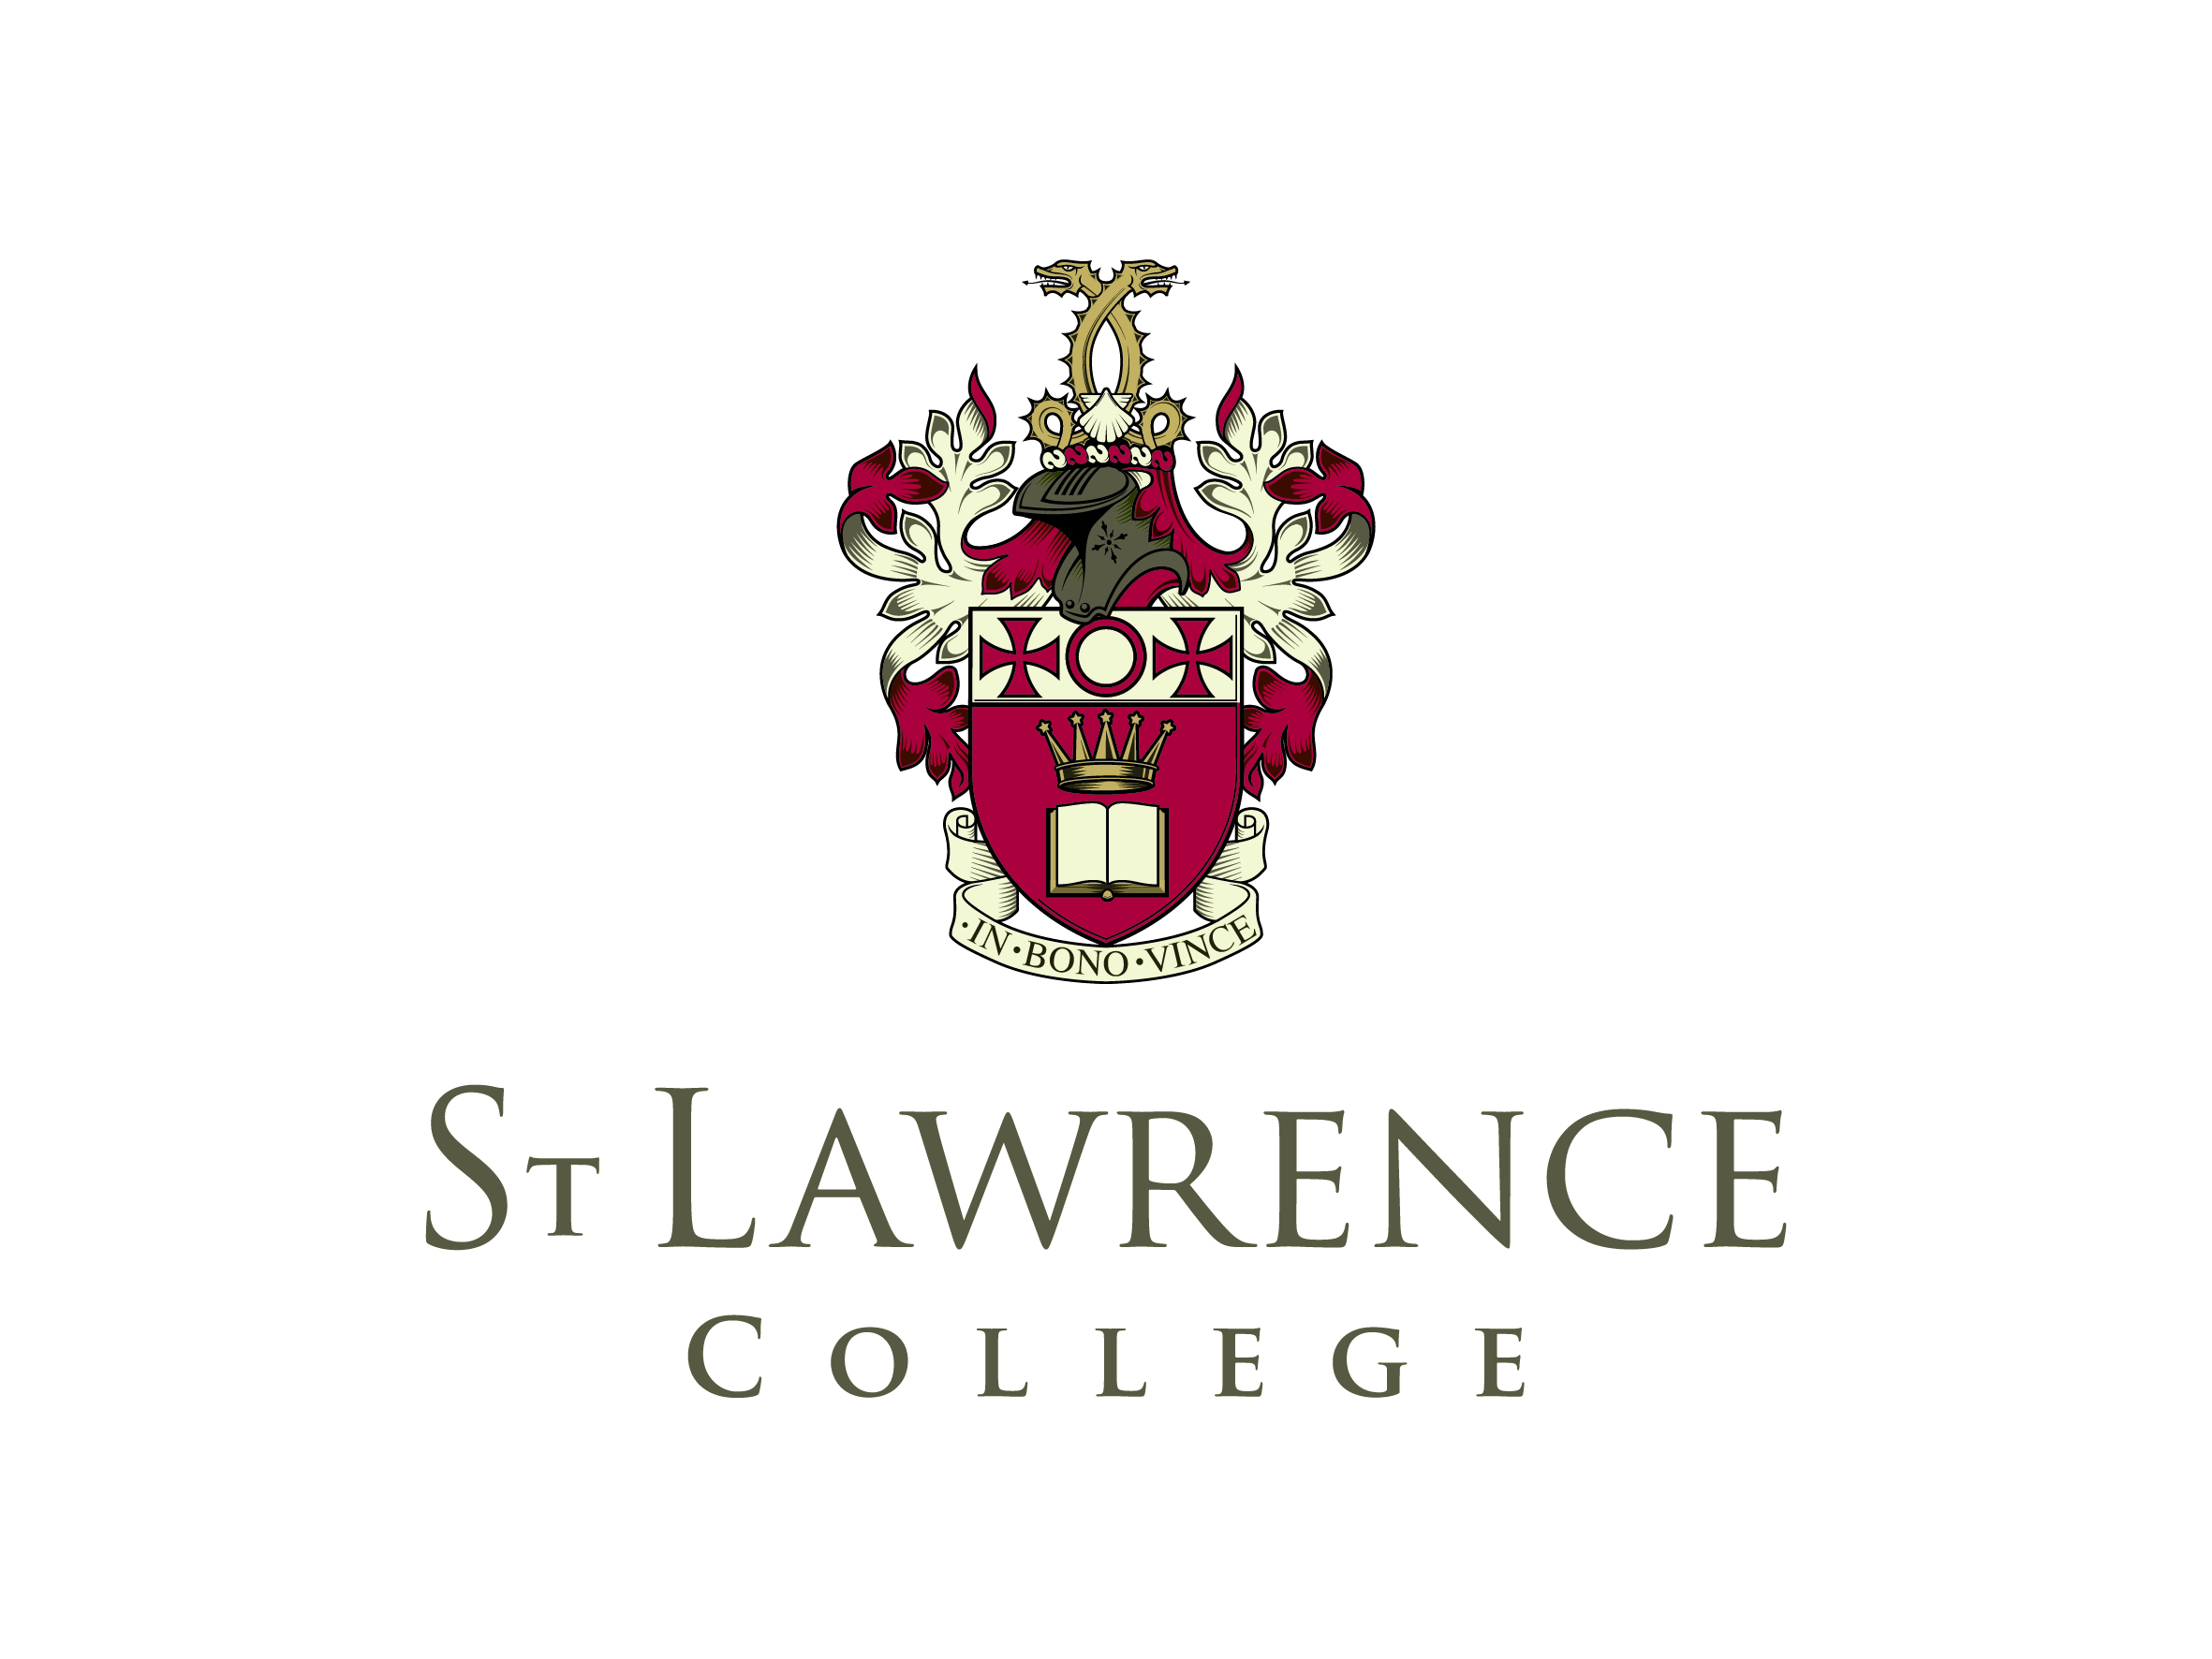 St. Lawrence College校徽